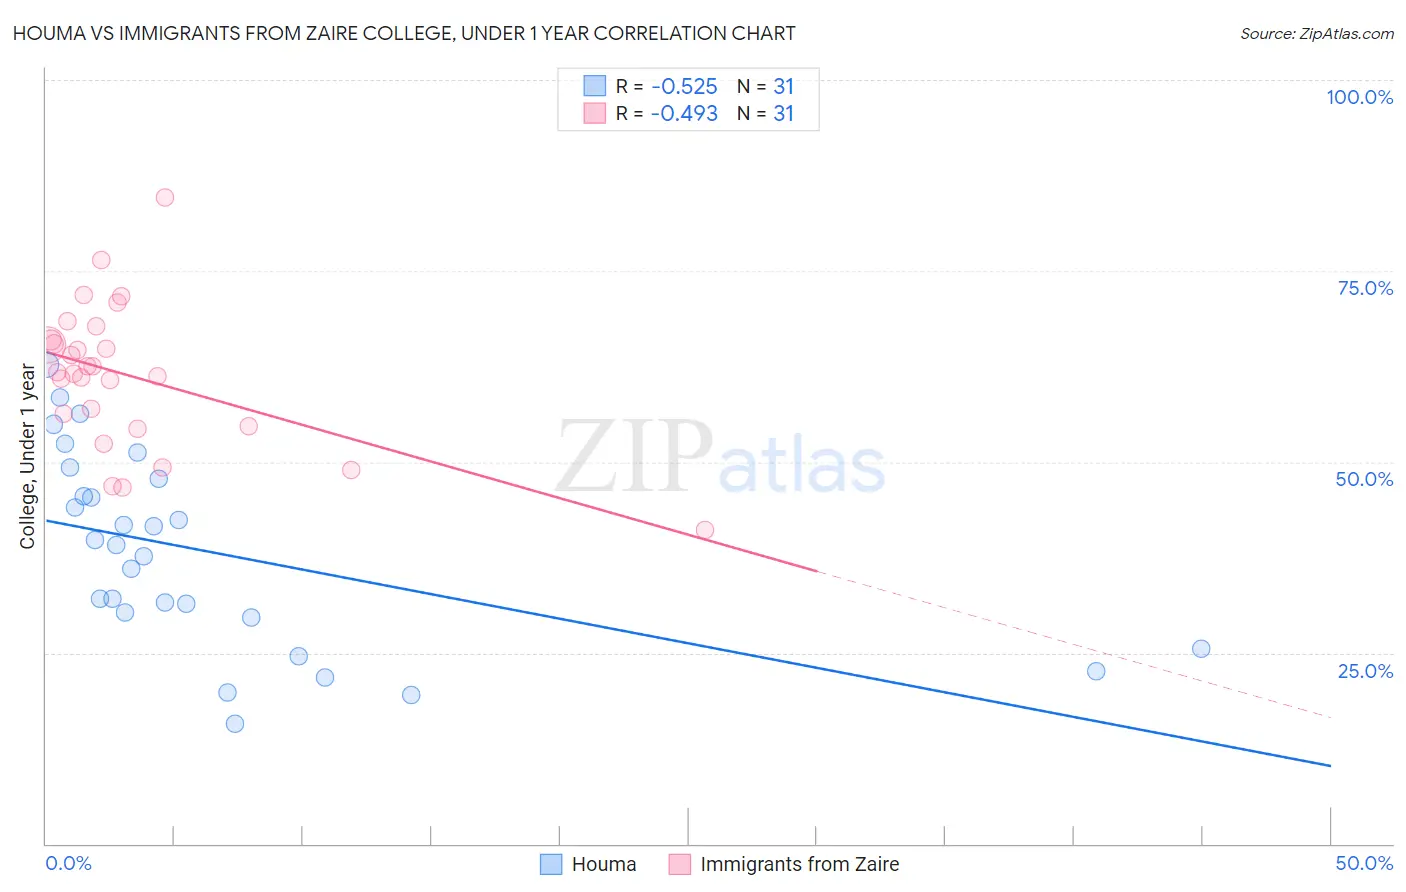 Houma vs Immigrants from Zaire College, Under 1 year